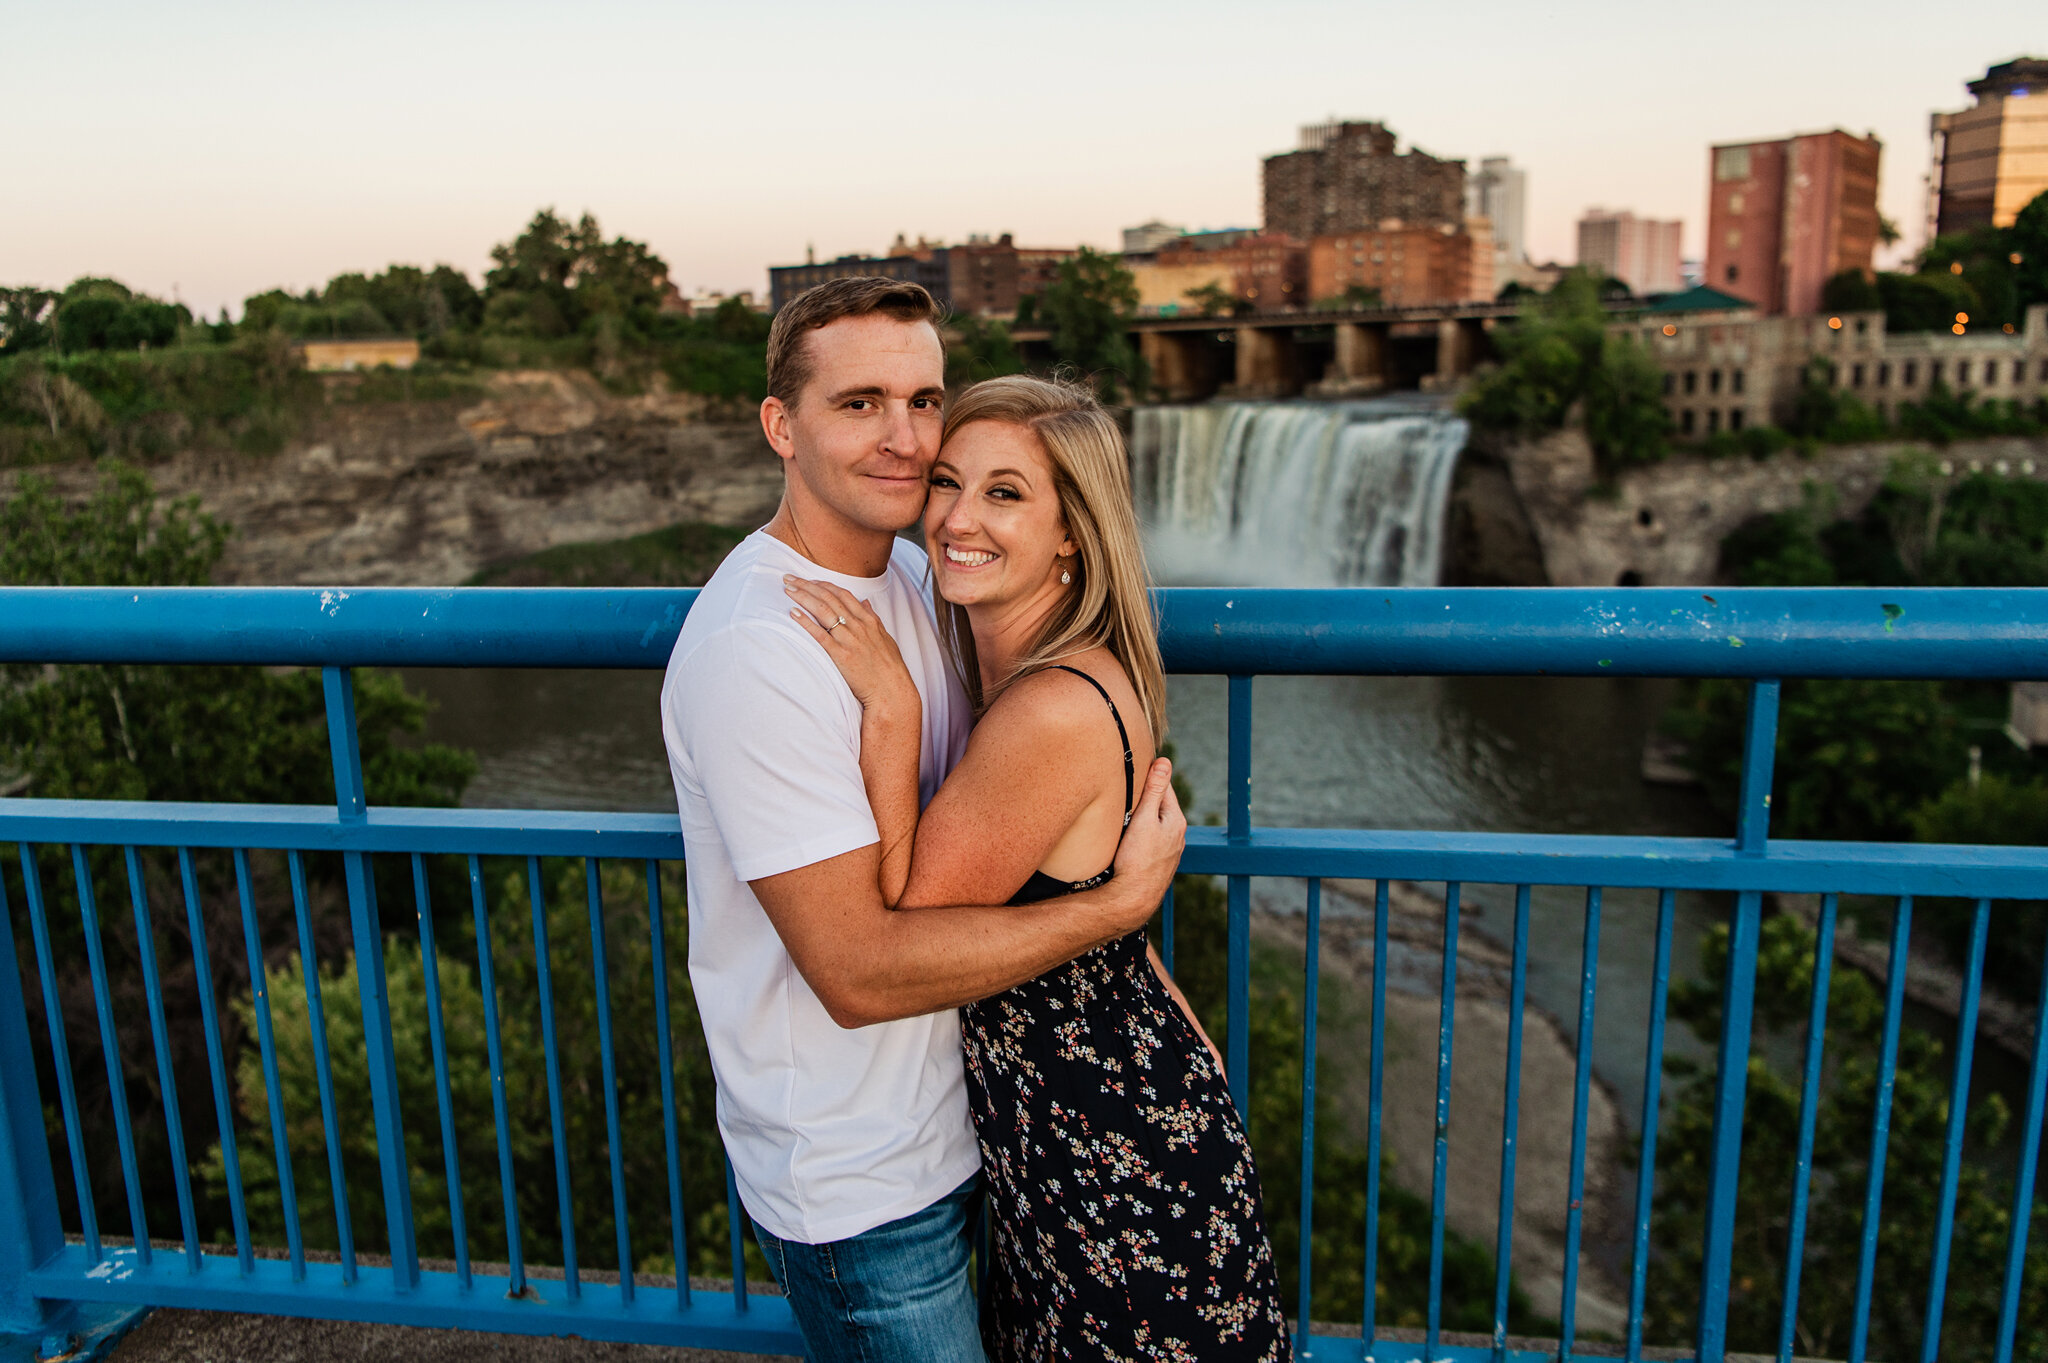 Genesee_Brew_House_High_Falls_Rochester_Engagement_Session_JILL_STUDIO_Rochester_NY_Photographer_5911.jpg